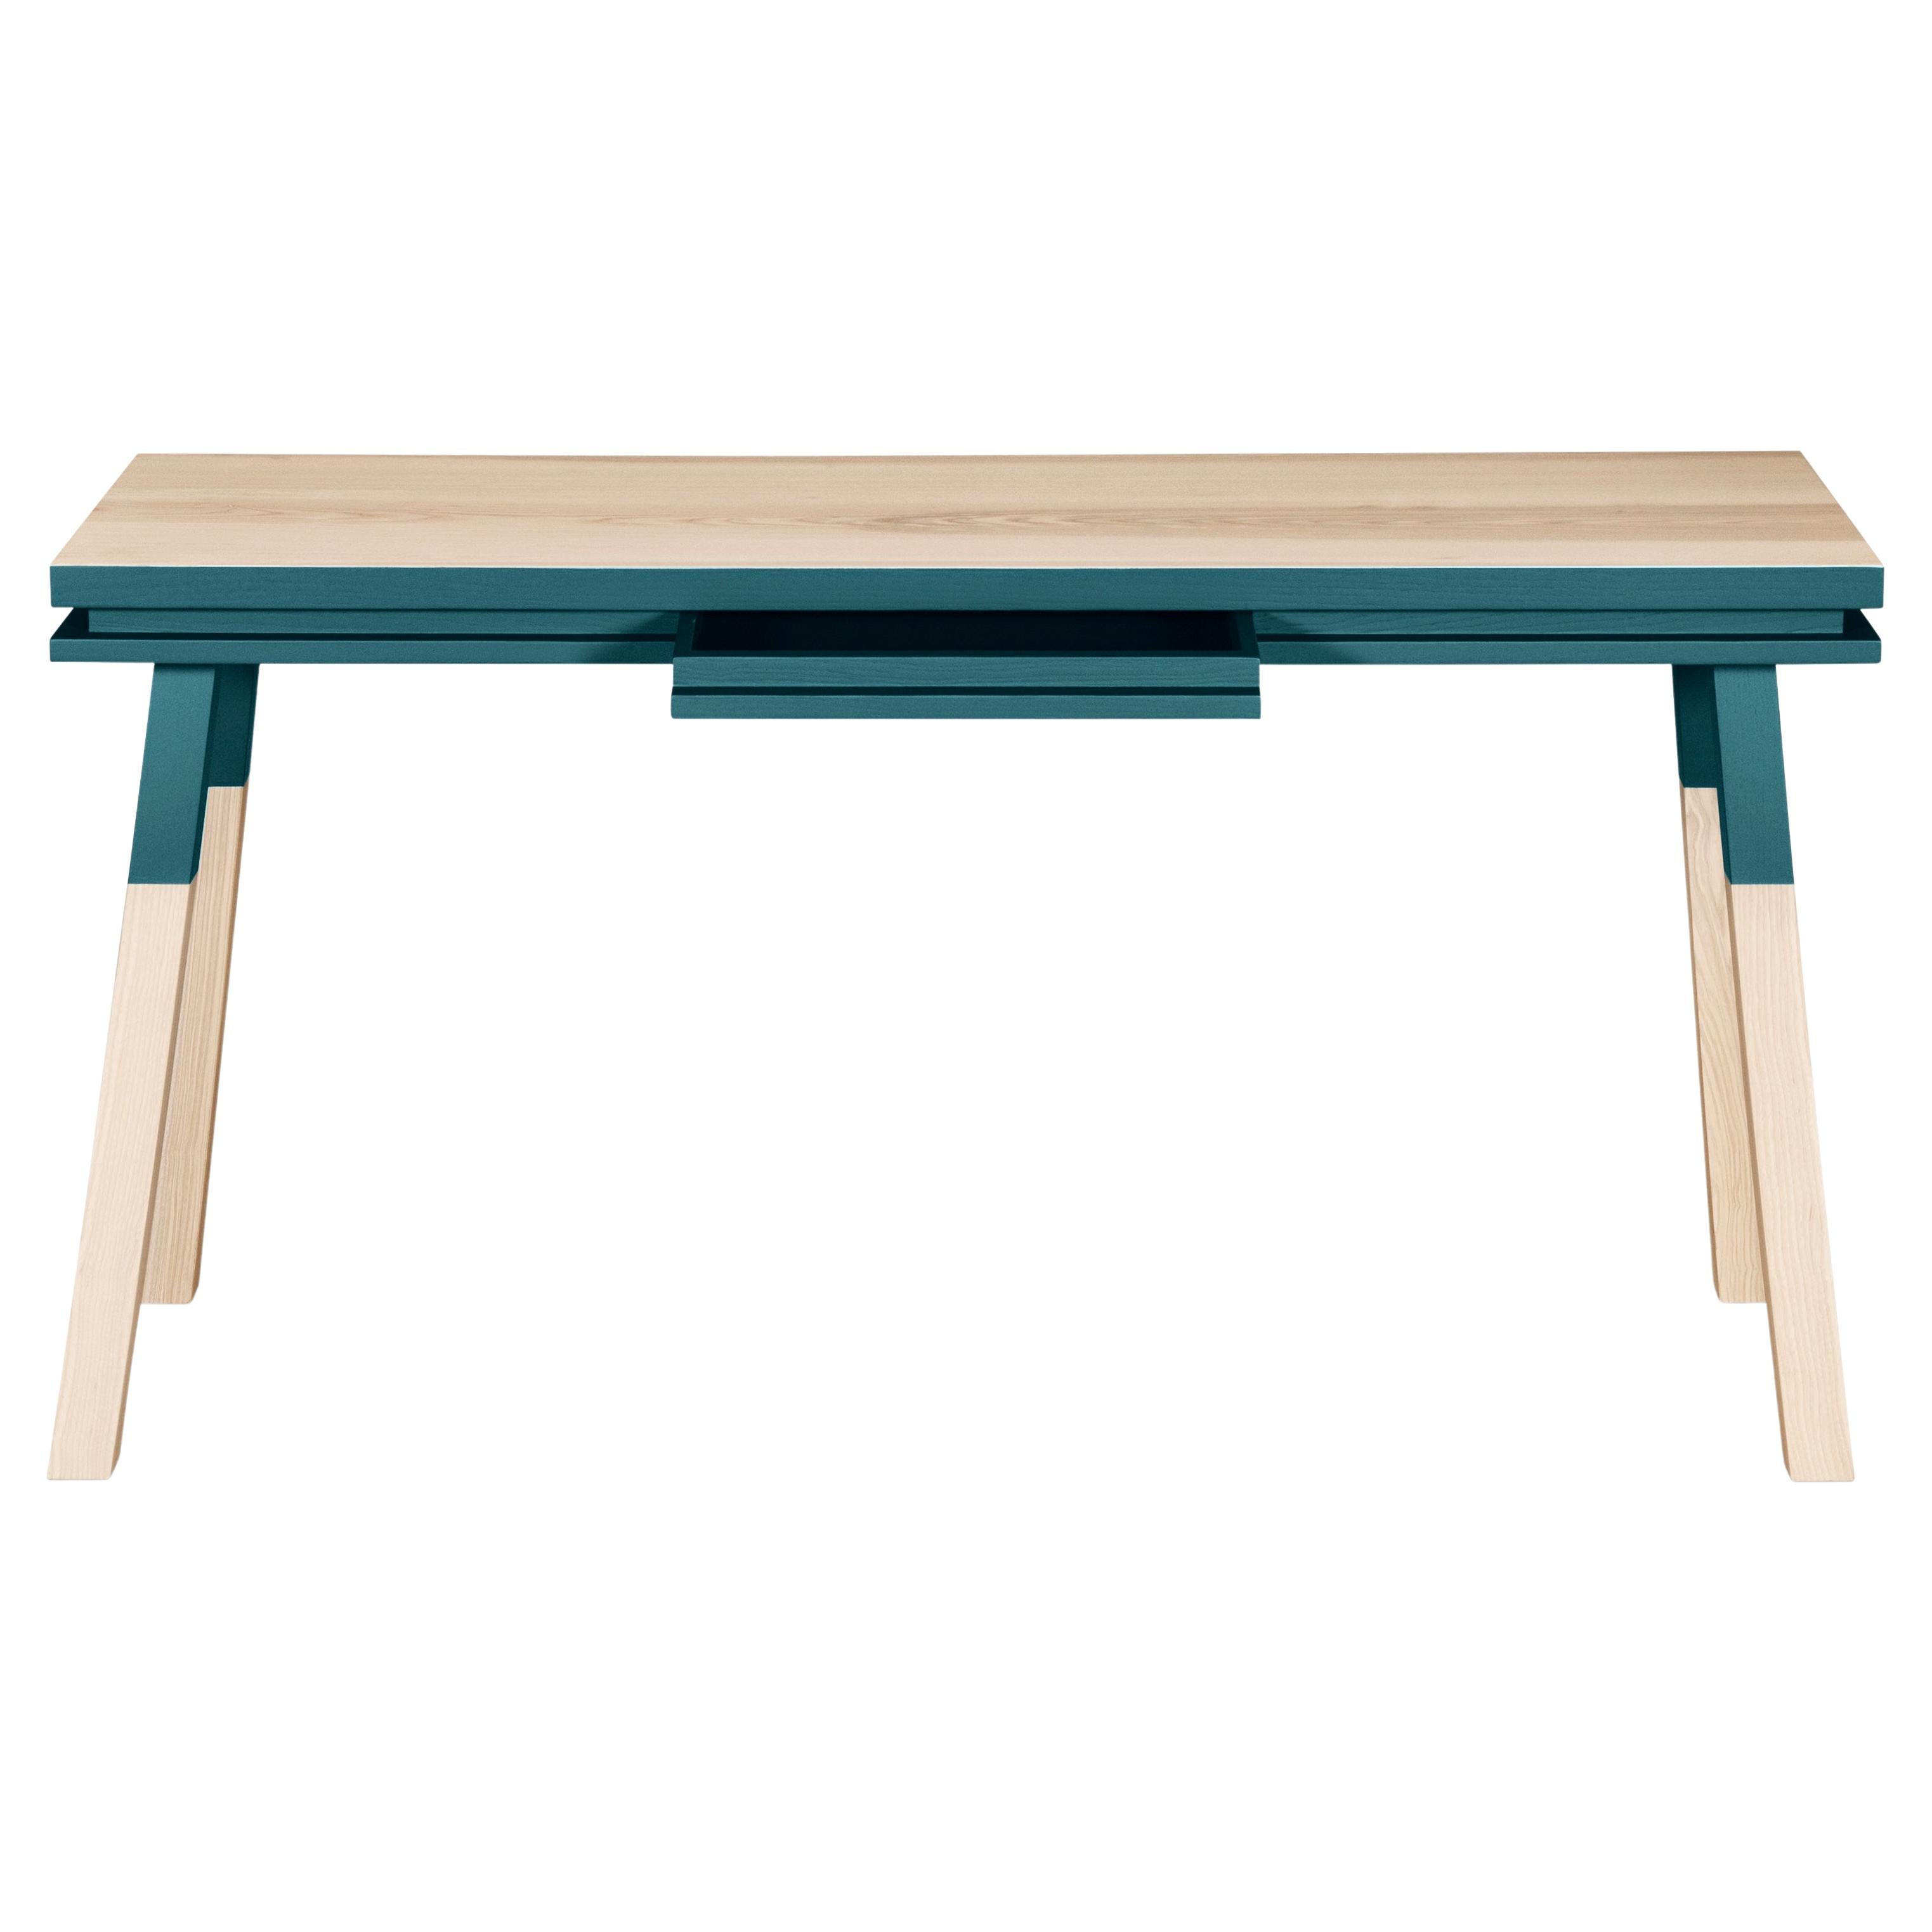 Sea blue writing table in 11 colours design by Eric Gizard, Paris - French craft